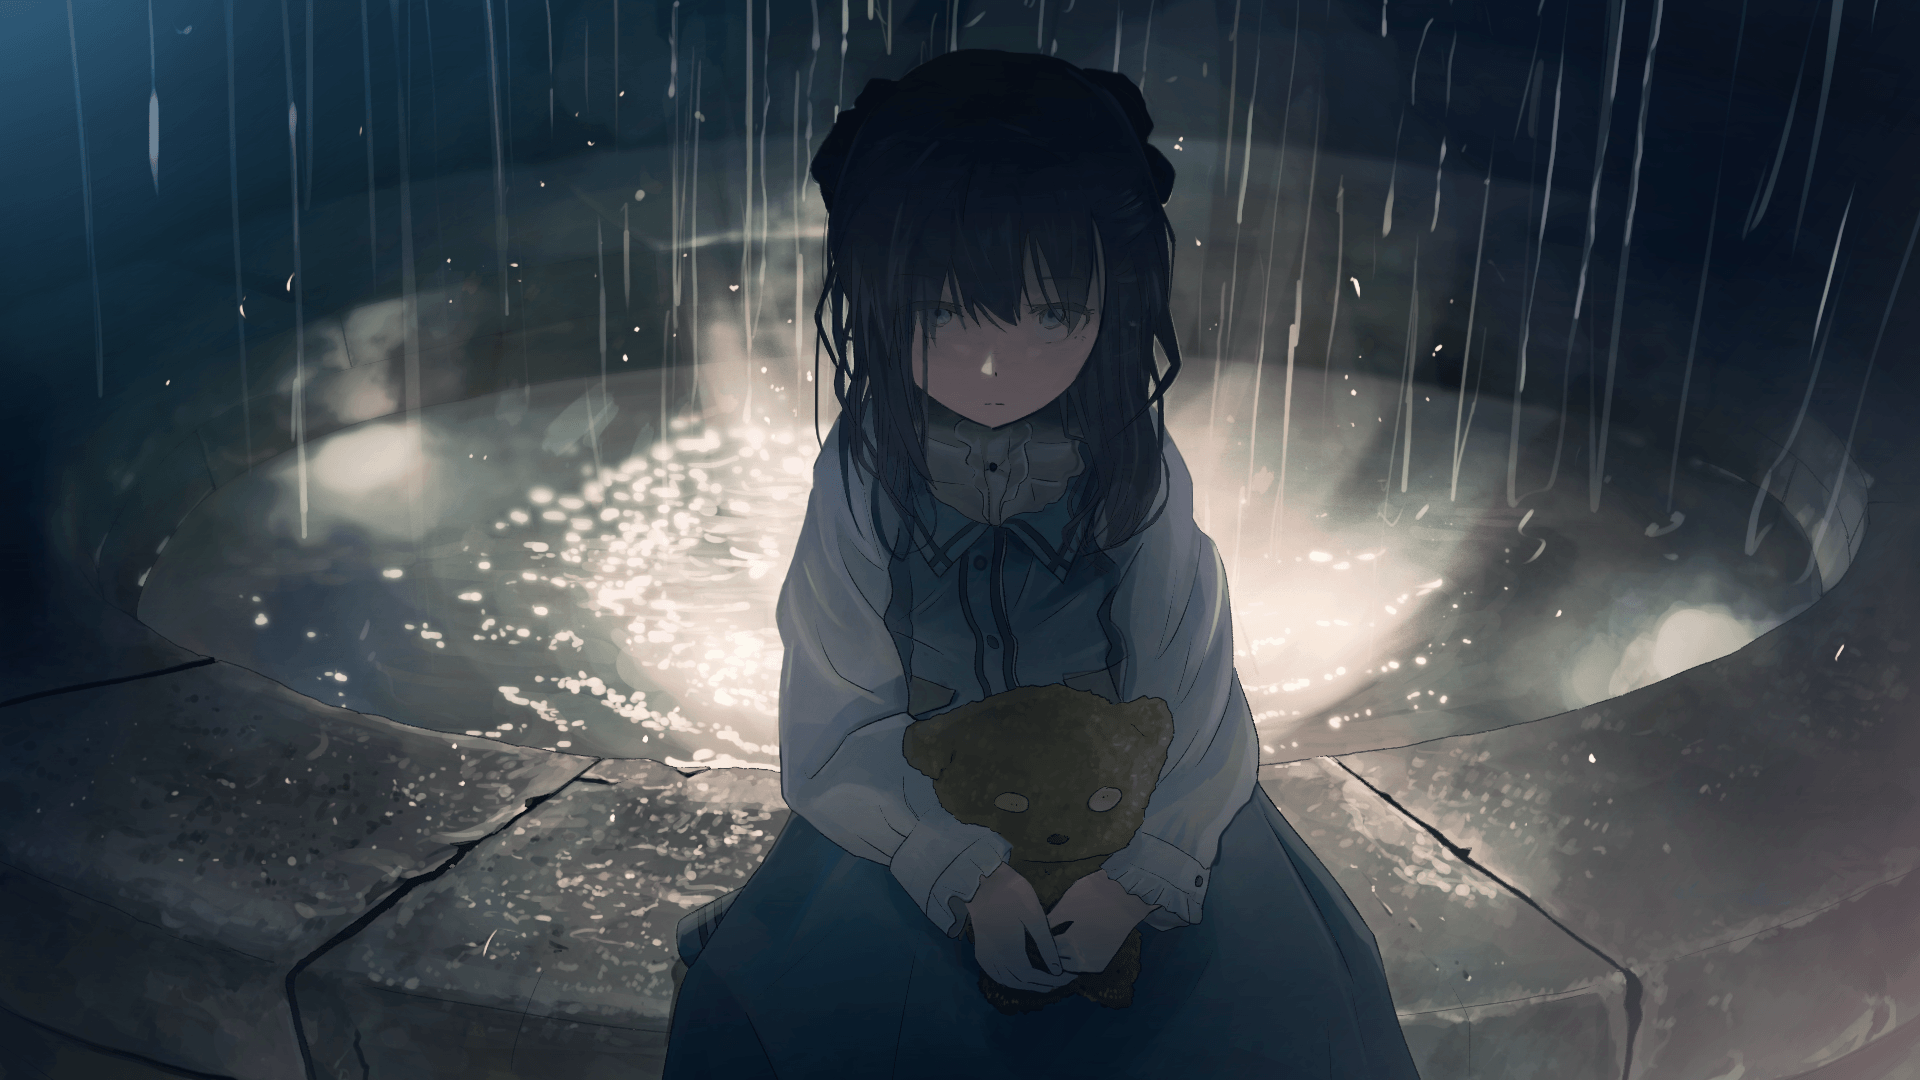 Alone Anime Girls Wallpapers - Wallpaper Cave